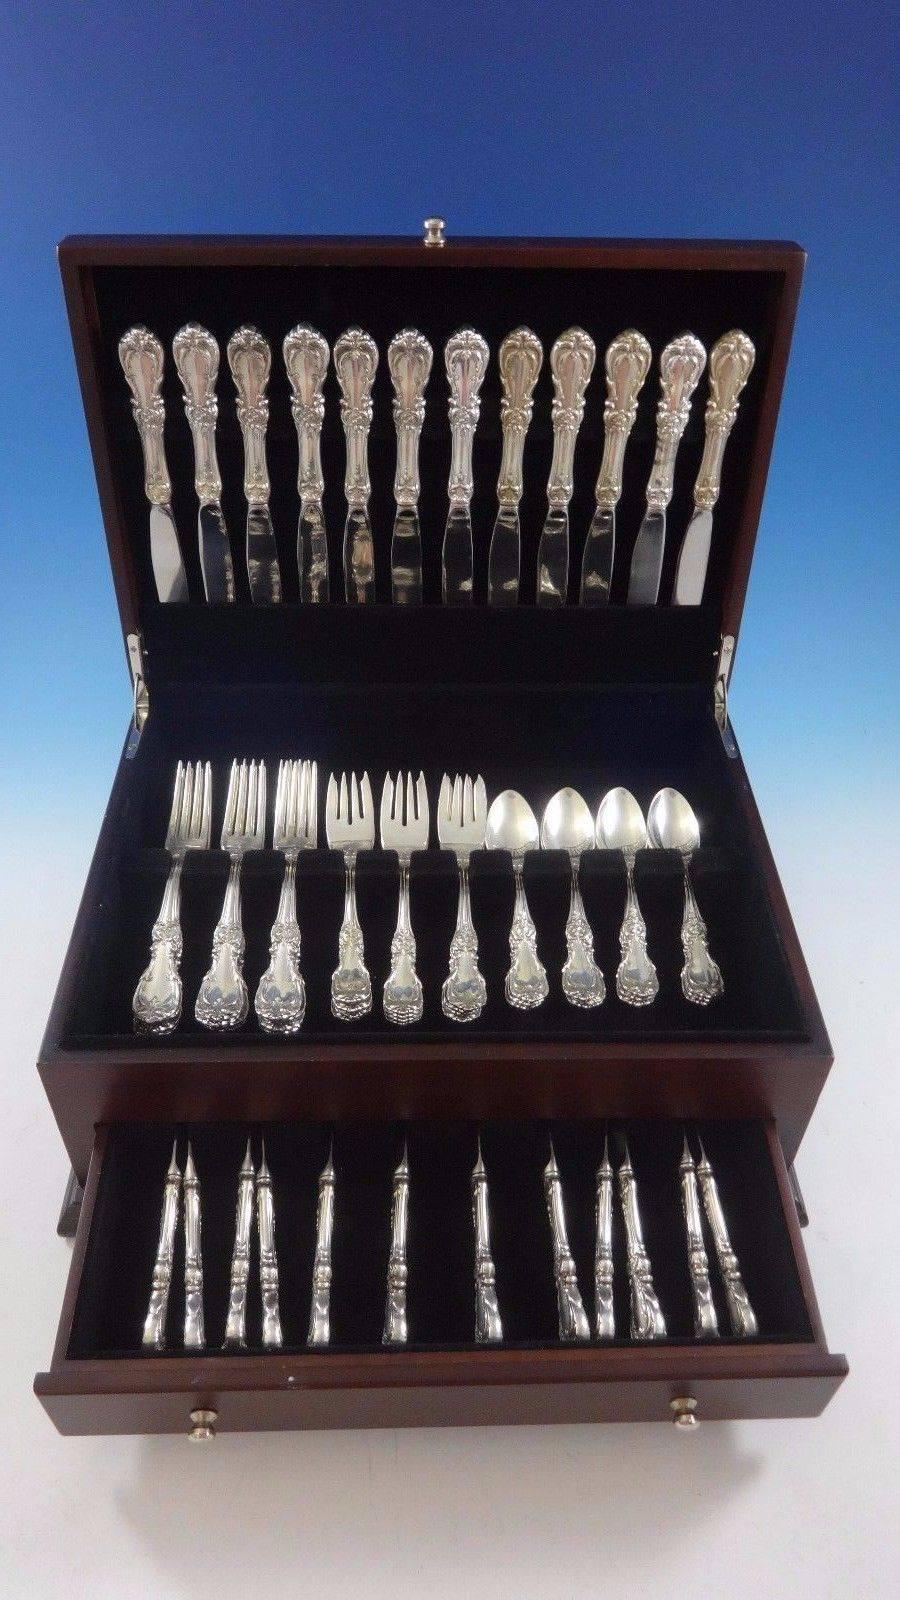 Burgundy by Reed & Barton sterling silver flatware set of 60 pieces. This set includes:

12 knives, 8 7/8